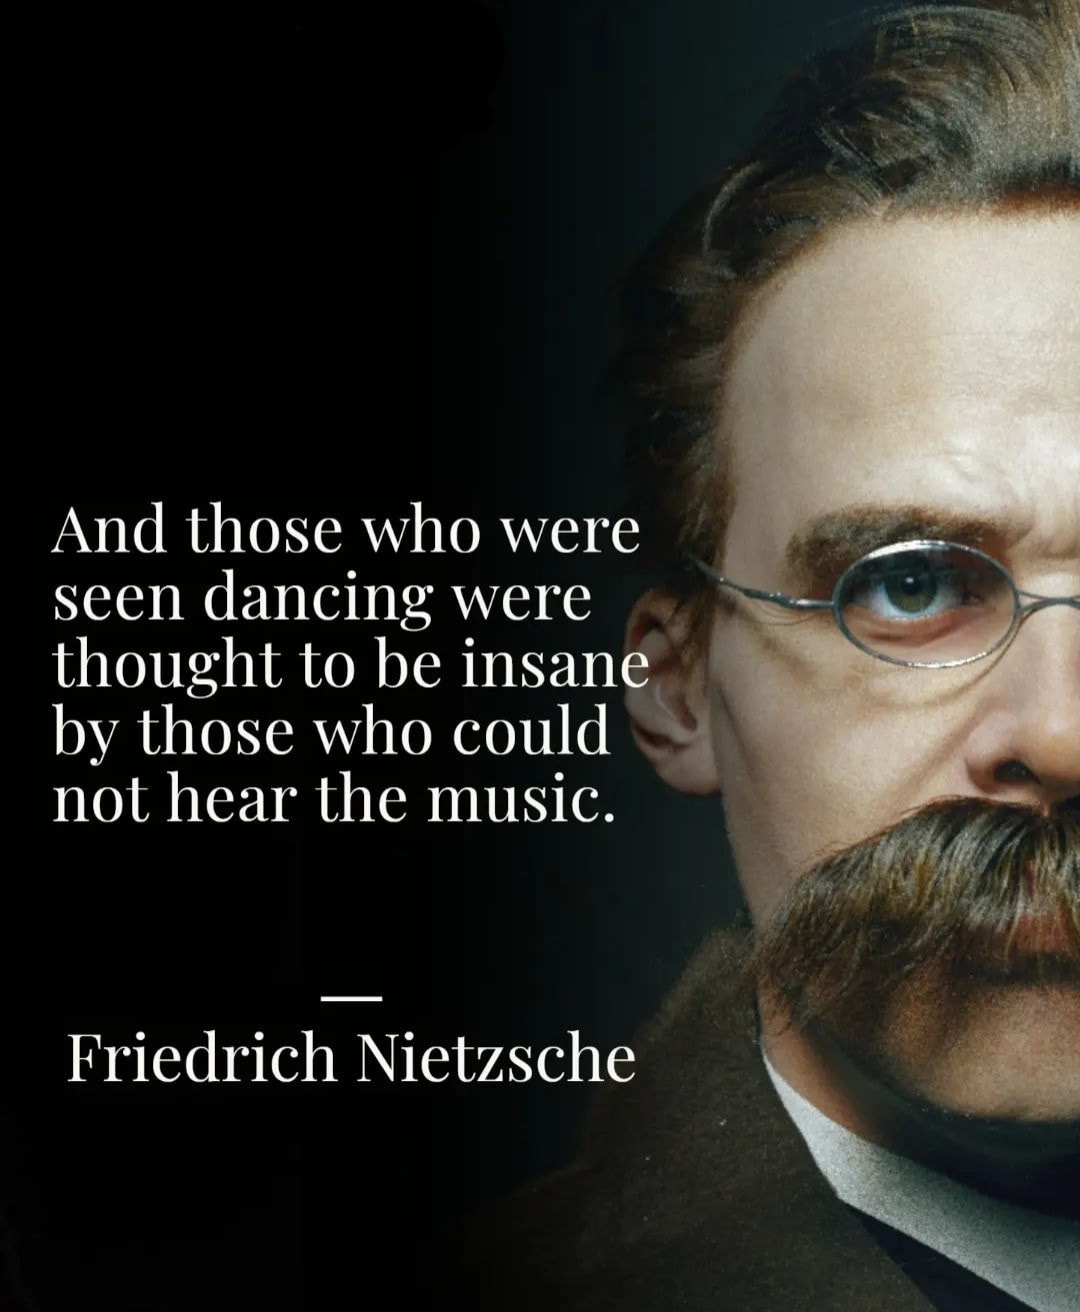 And those who were seen dancing were thought to be insane by those who could not hear the music. – Friedrich Nietzsche